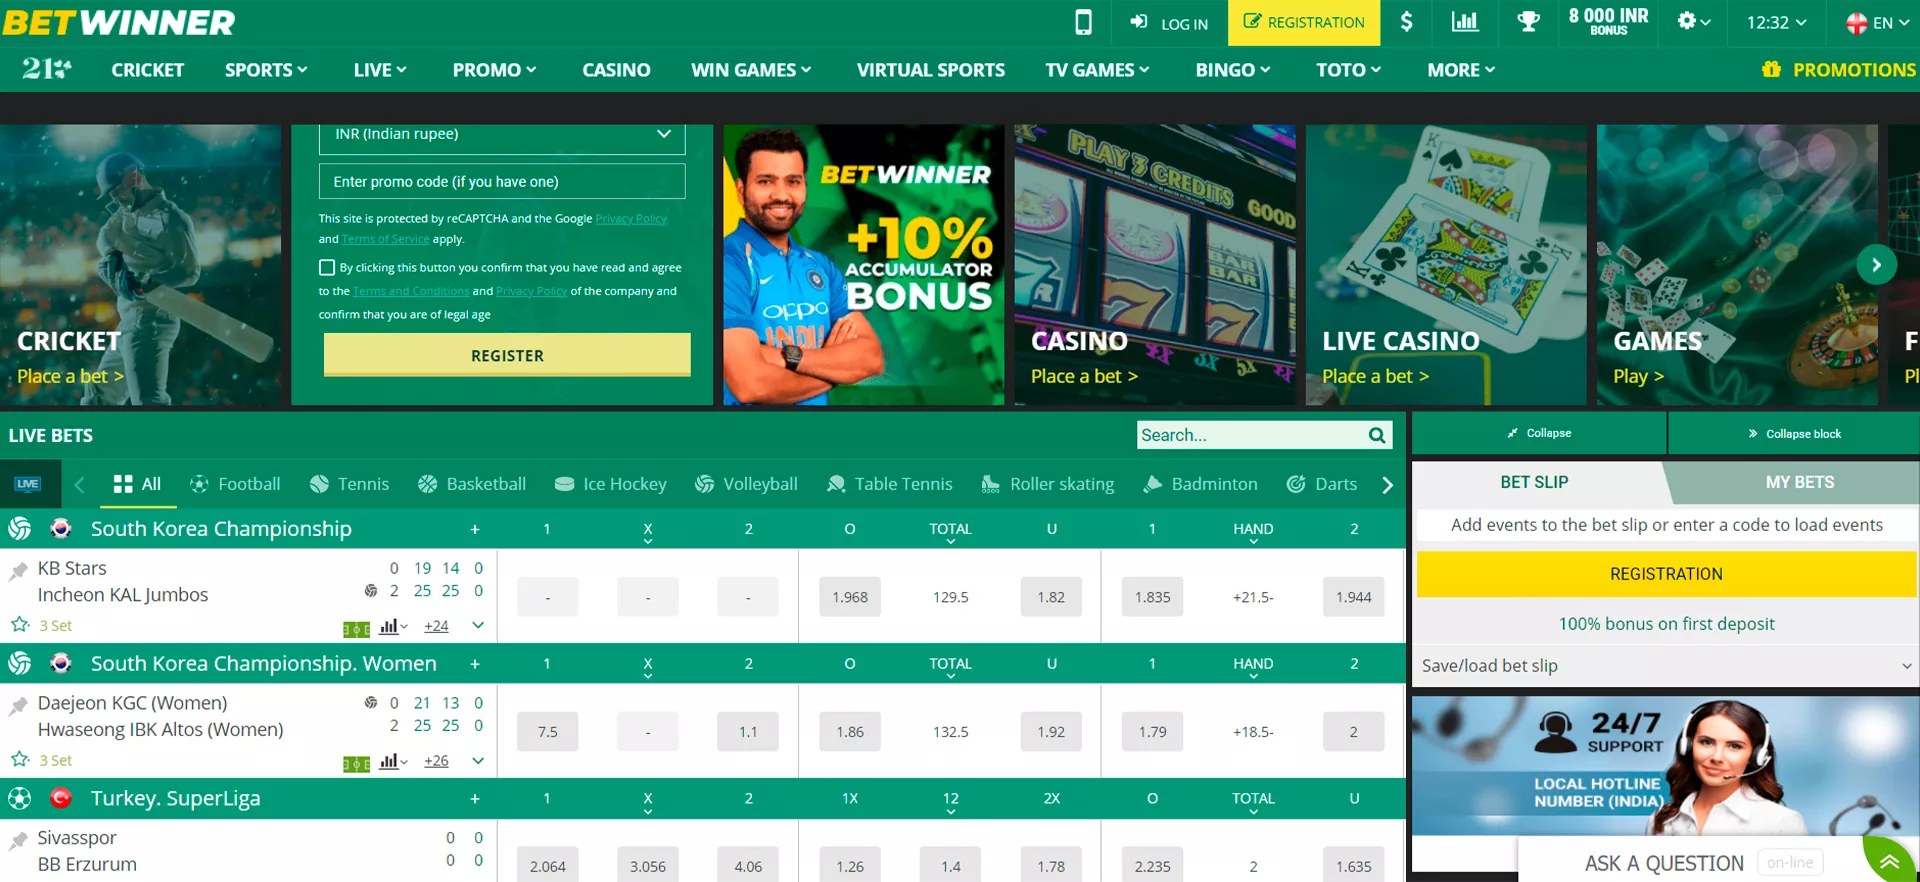 So you can consider Betwinner as a convenient betting platform.